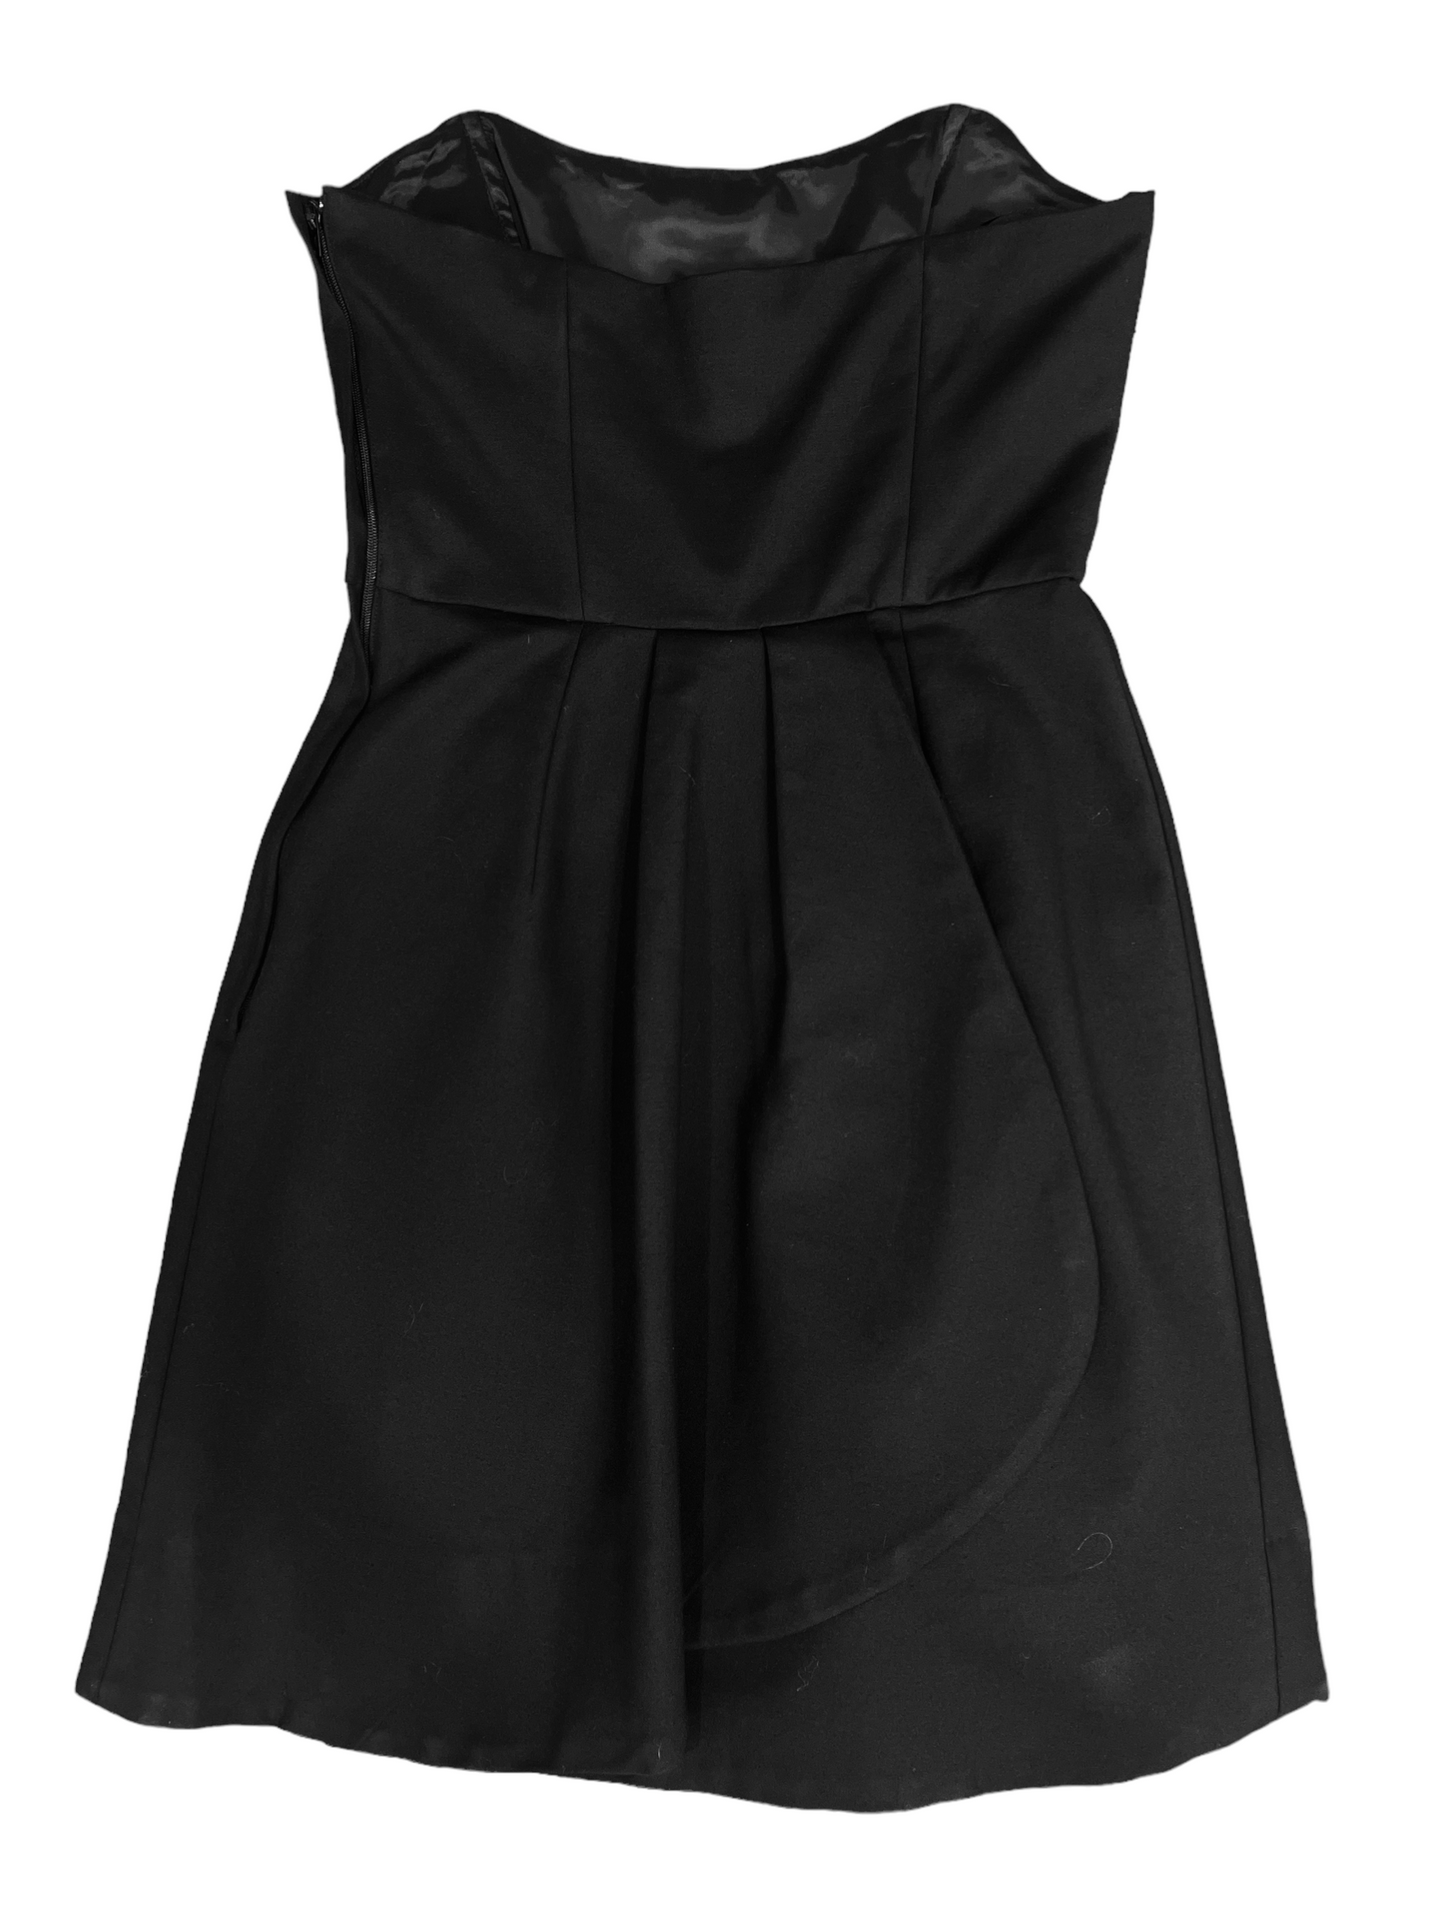 French Connection Black Strapless Pleated Cocktail Dress Size 4 NWT